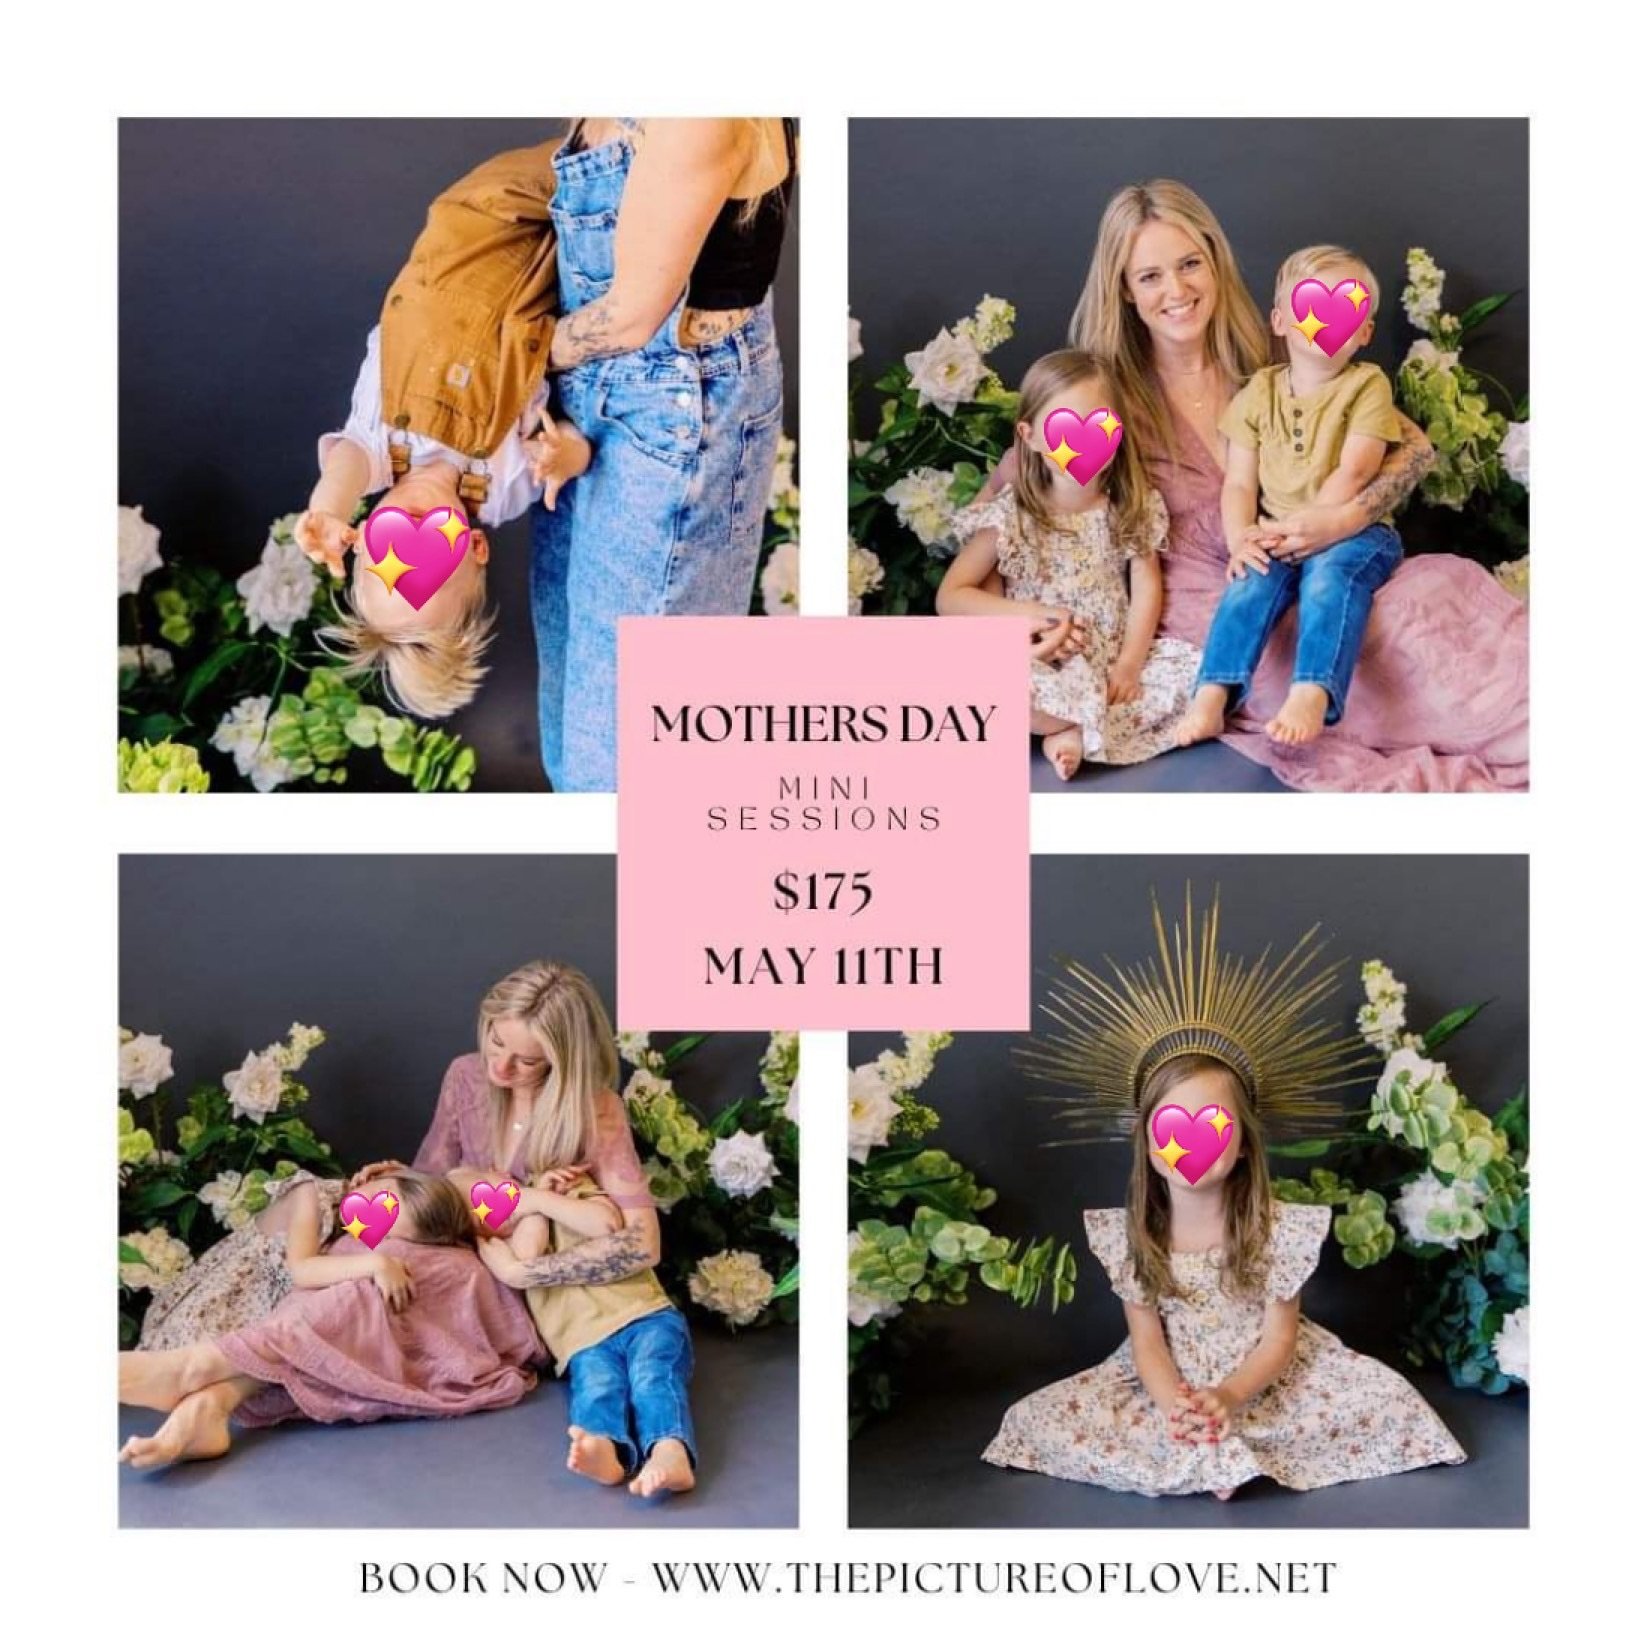 MOTHERS DAY MINI SESSIONS - ASHEVILLE NC 

May 11th - $175! Includes 5 images 📸

Limited availability! 

Mom doesn&rsquo;t want another necklace, she wants photos with her kids 📸🤟🏻🌼 

DM to book!